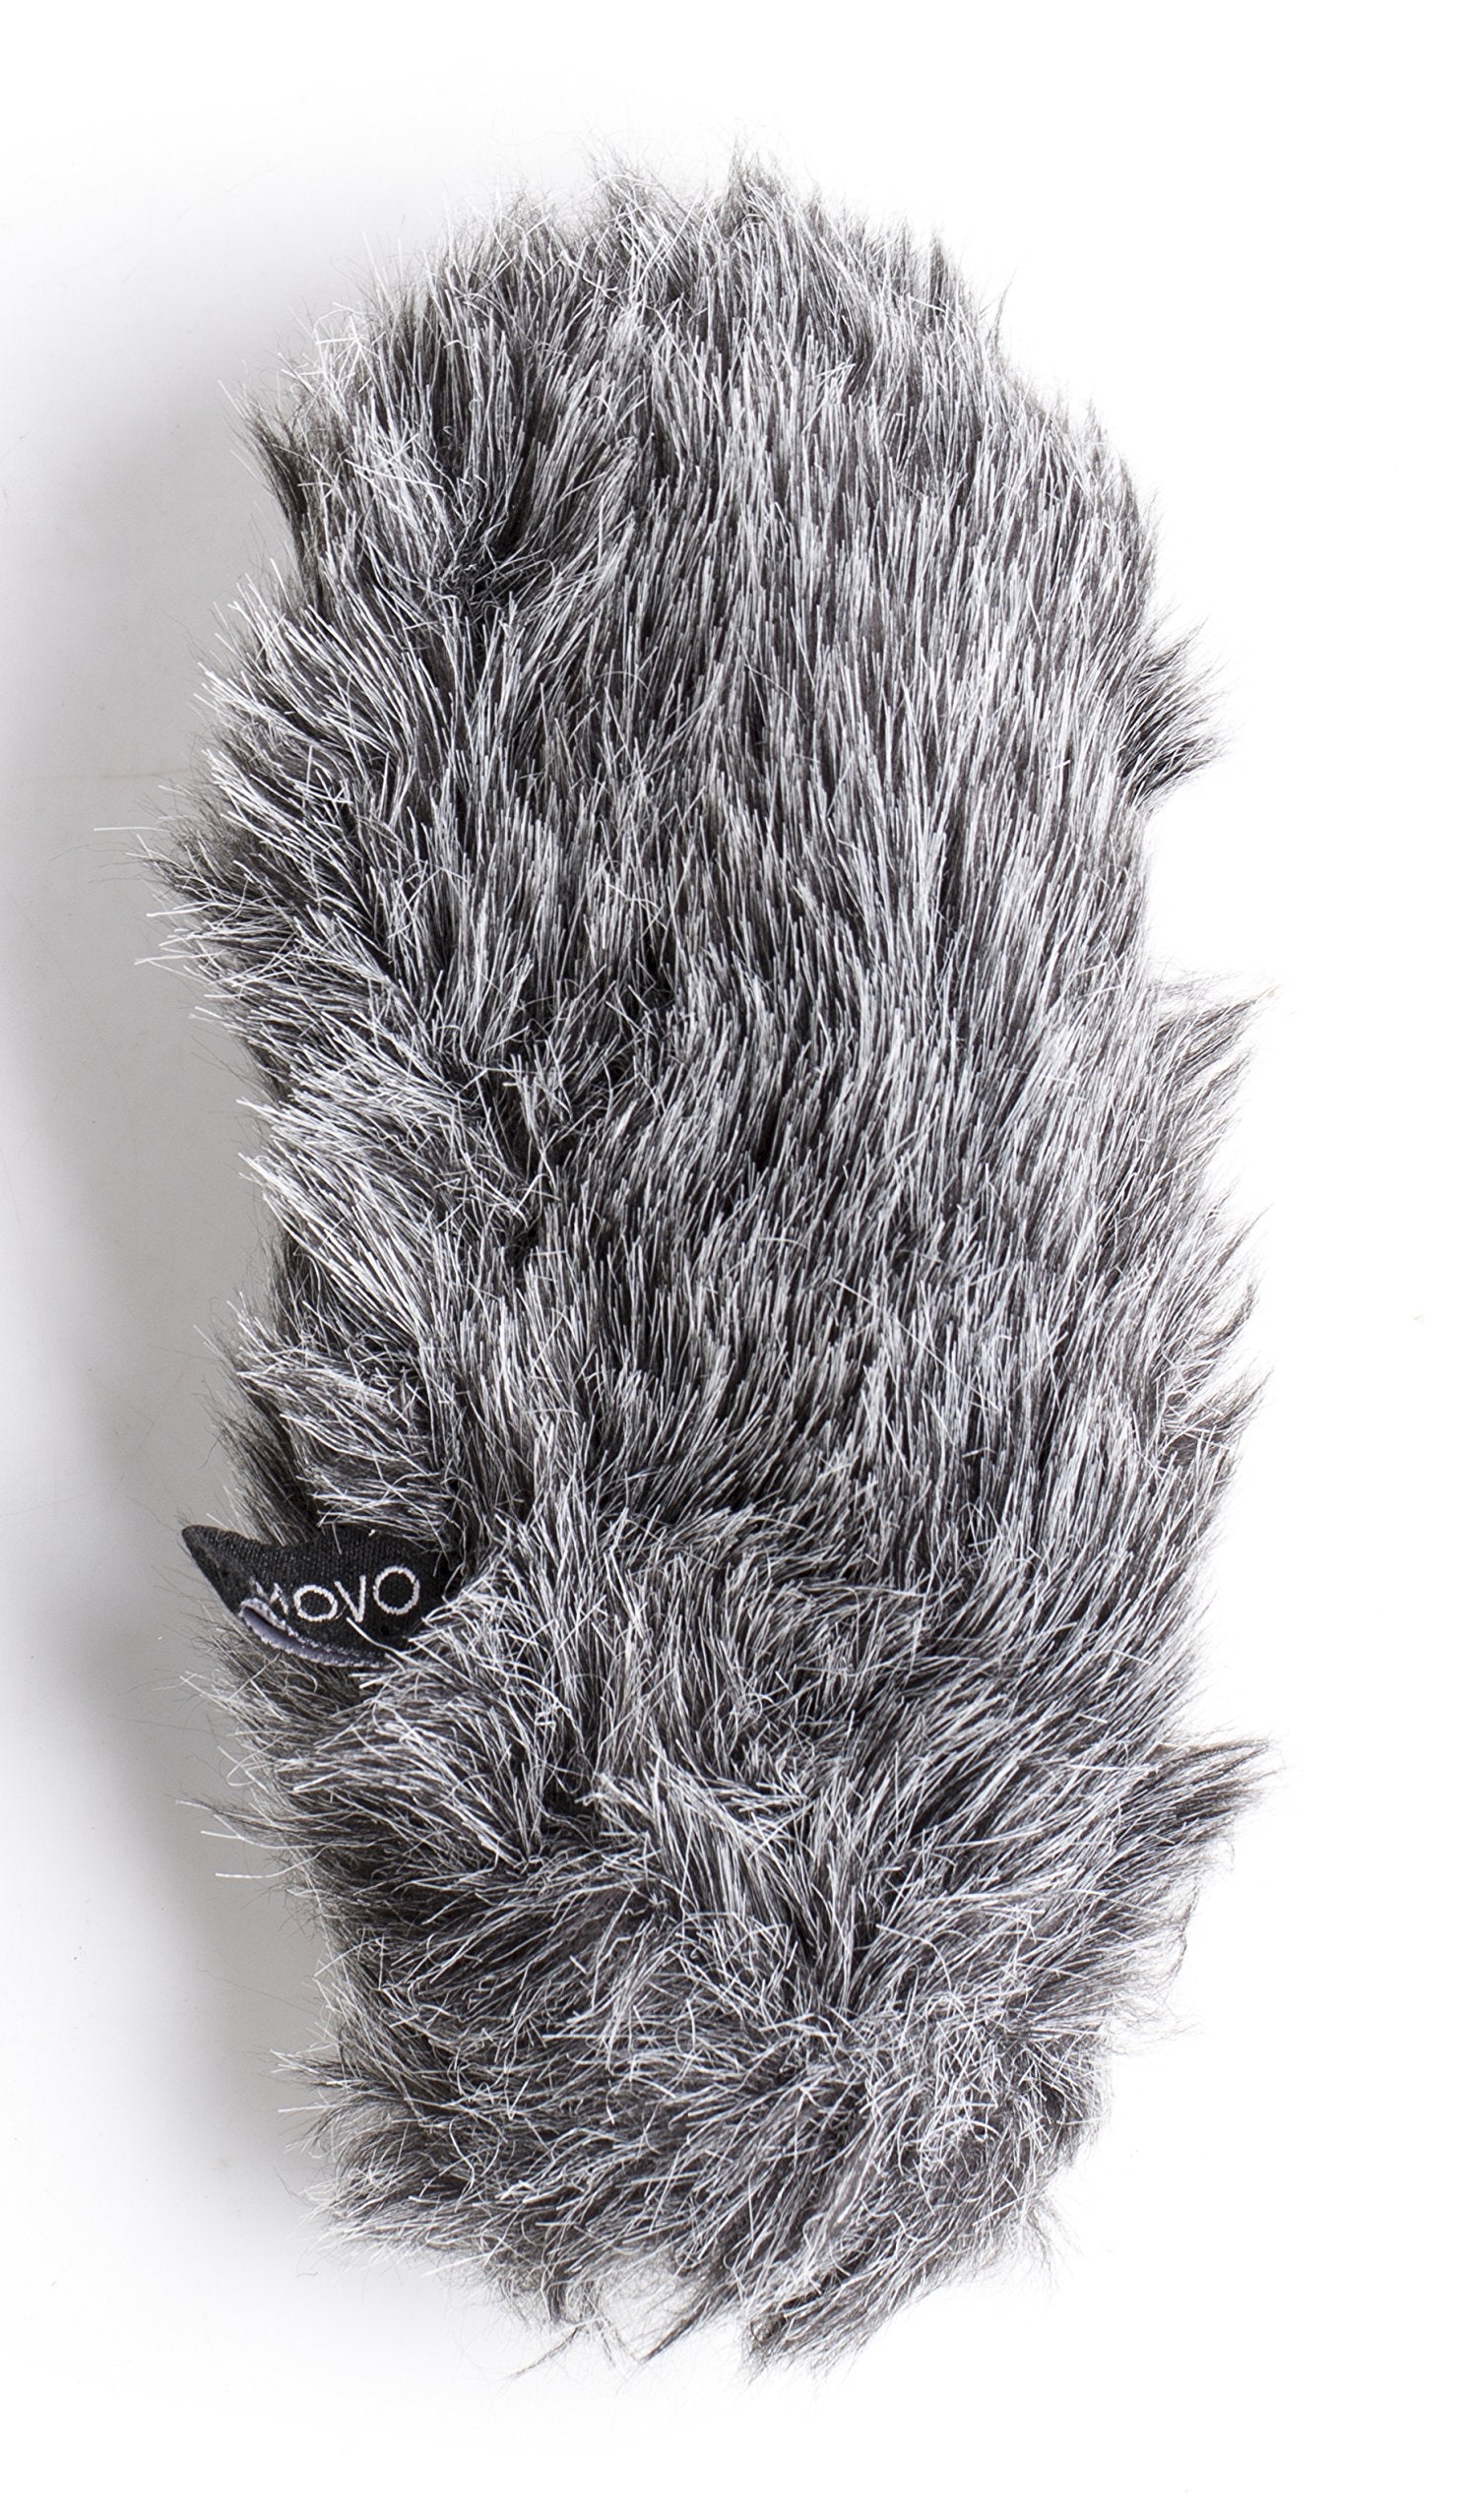 Movo WS-G8 Furry Outdoor Microphone Windscreen Muff Custom Fit for Rode VideoMic Pro (Dark Gray)  - Like New